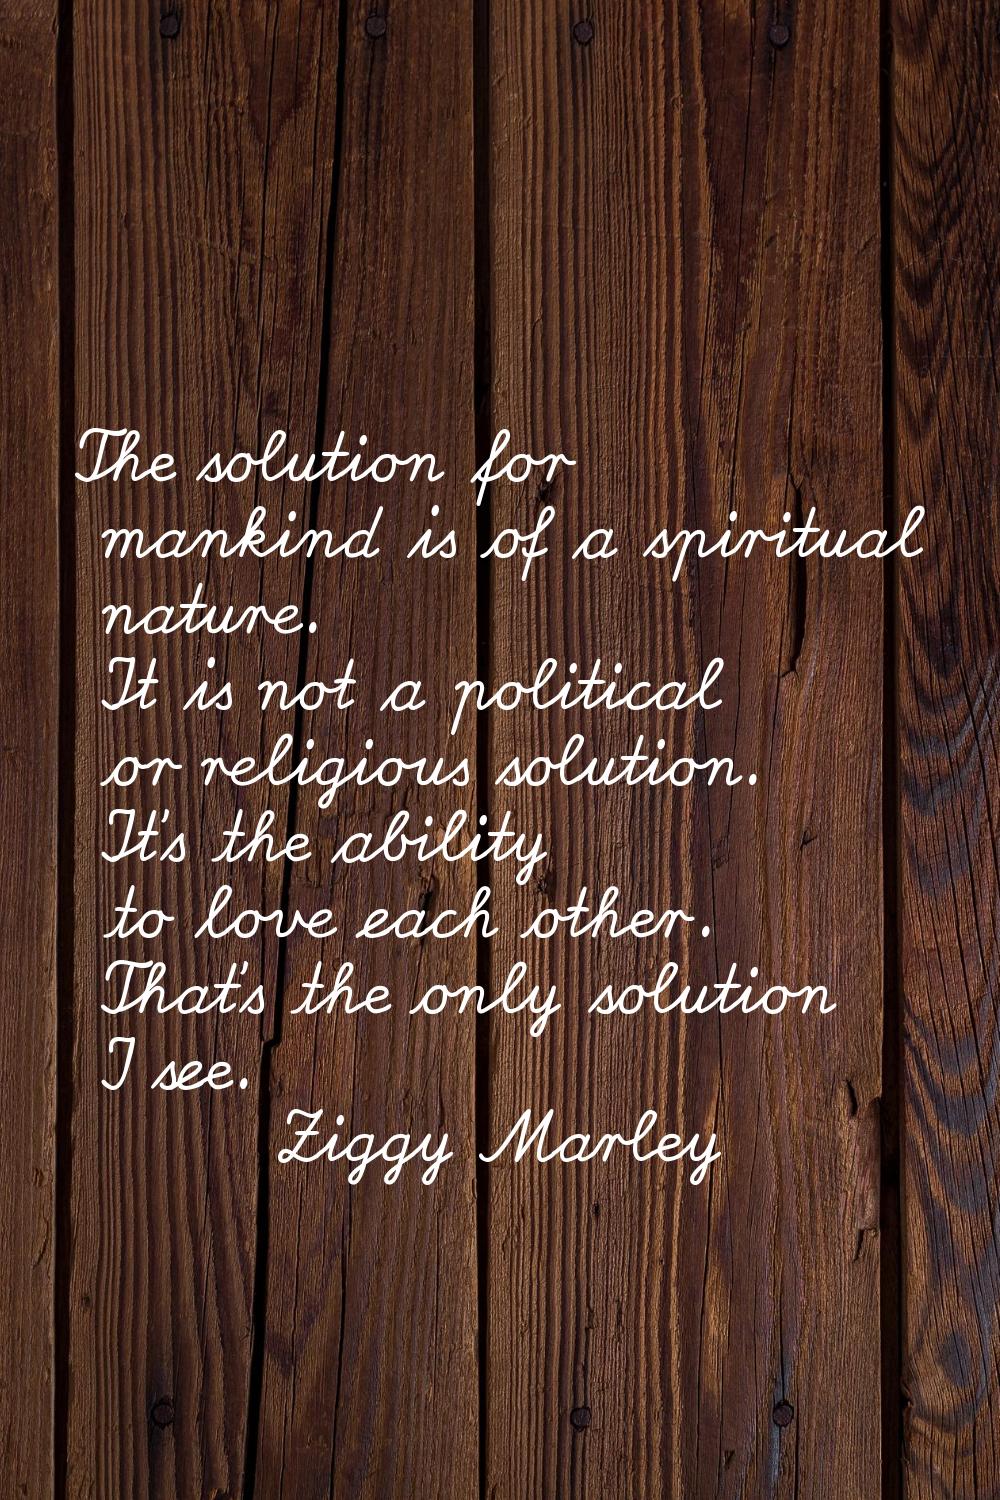 The solution for mankind is of a spiritual nature. It is not a political or religious solution. It'